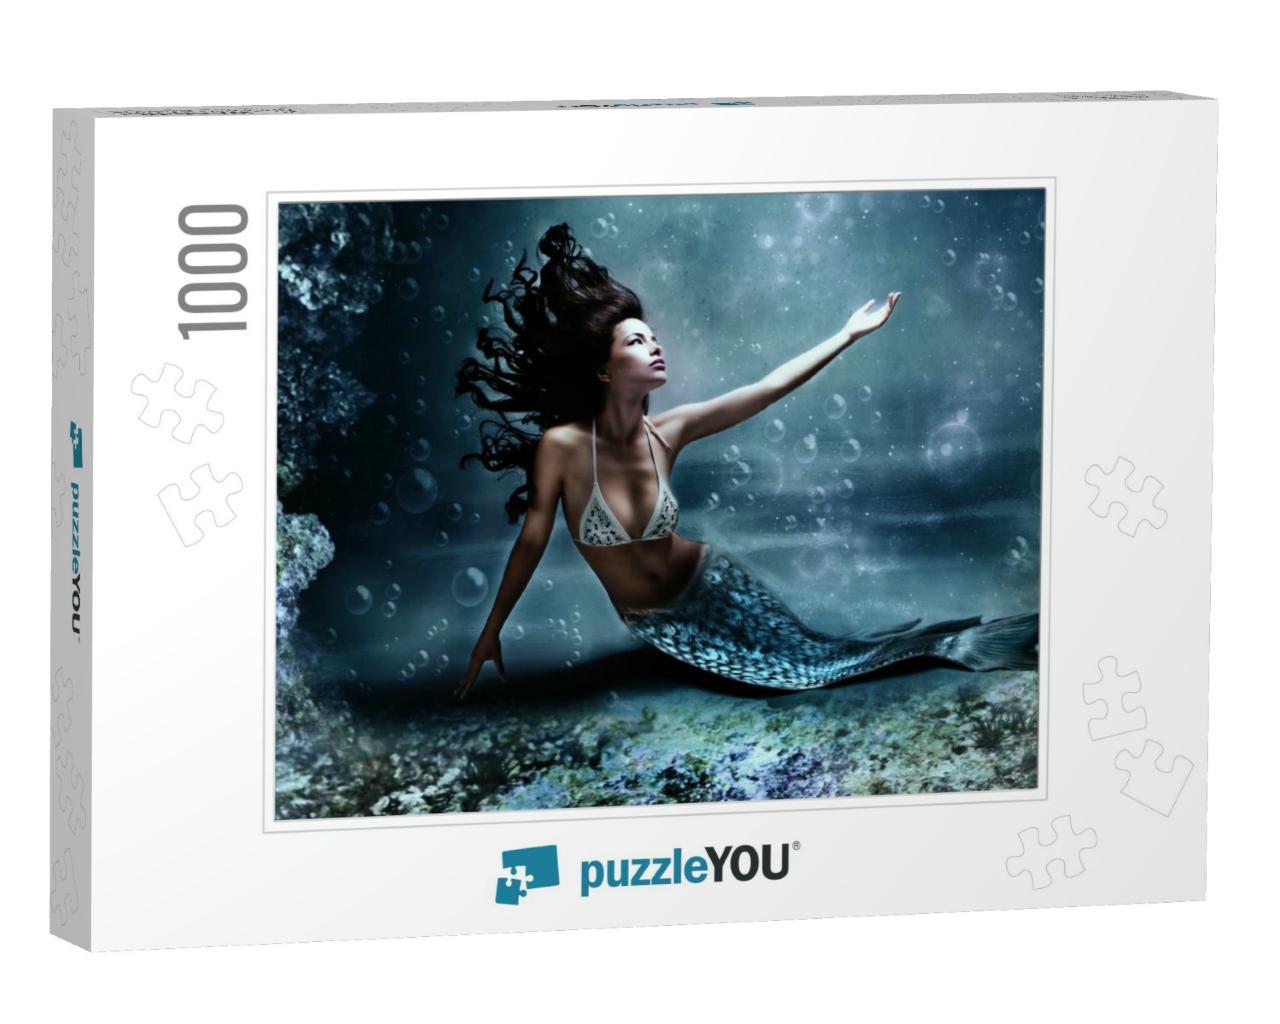 Mythology Being, Mermaid in Underwater Scene, Photo Compi... Jigsaw Puzzle with 1000 pieces